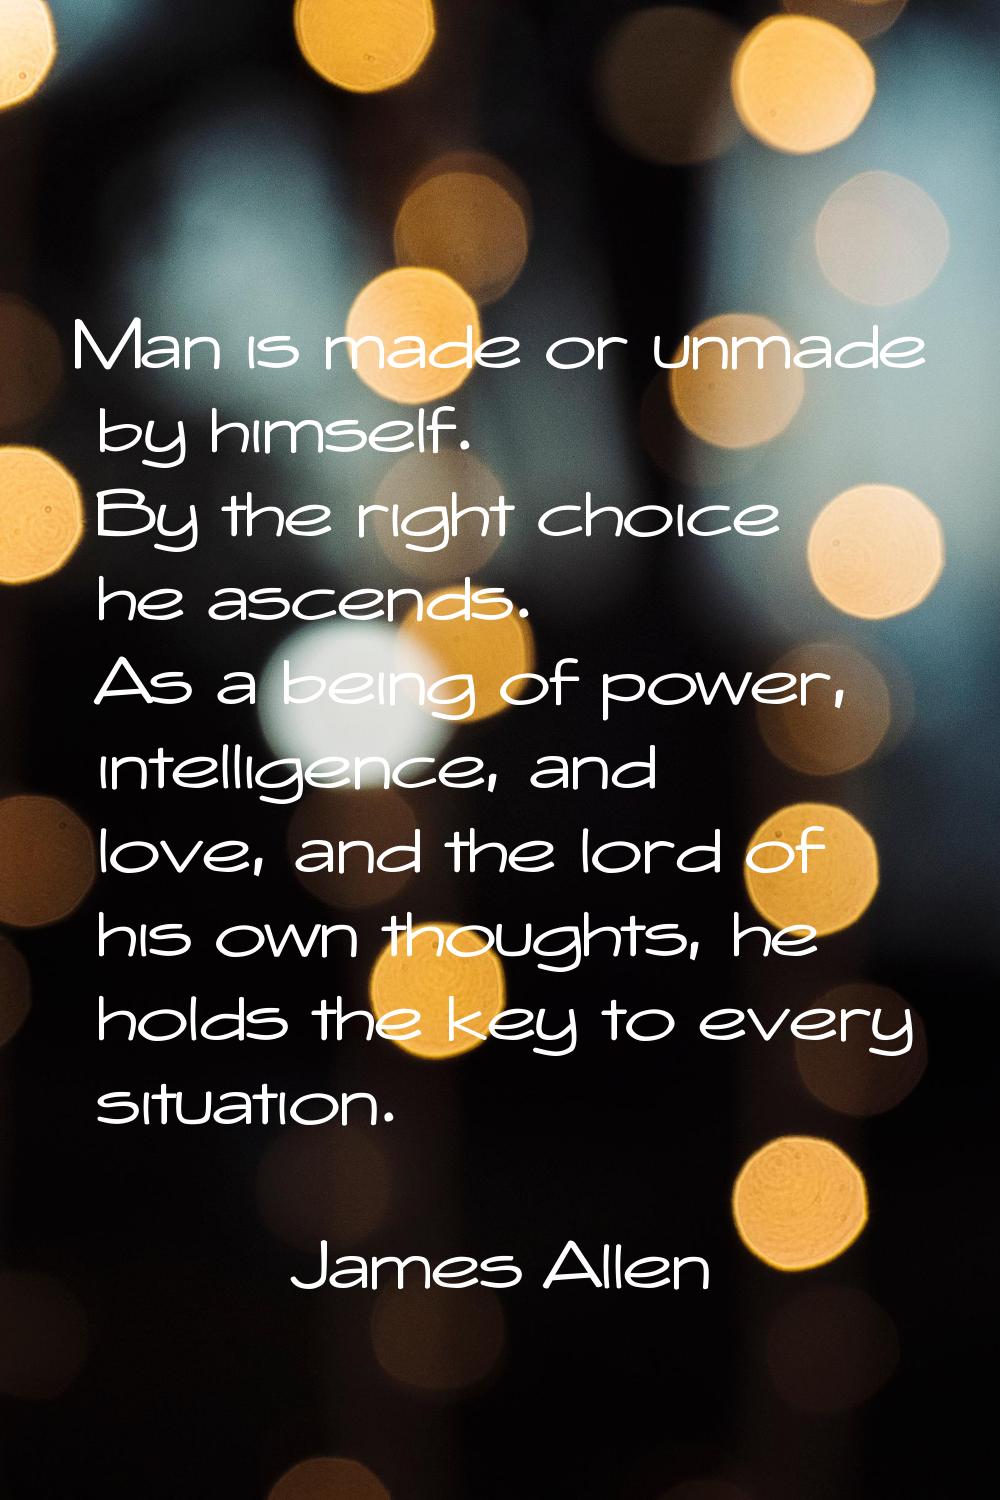 Man is made or unmade by himself. By the right choice he ascends. As a being of power, intelligence